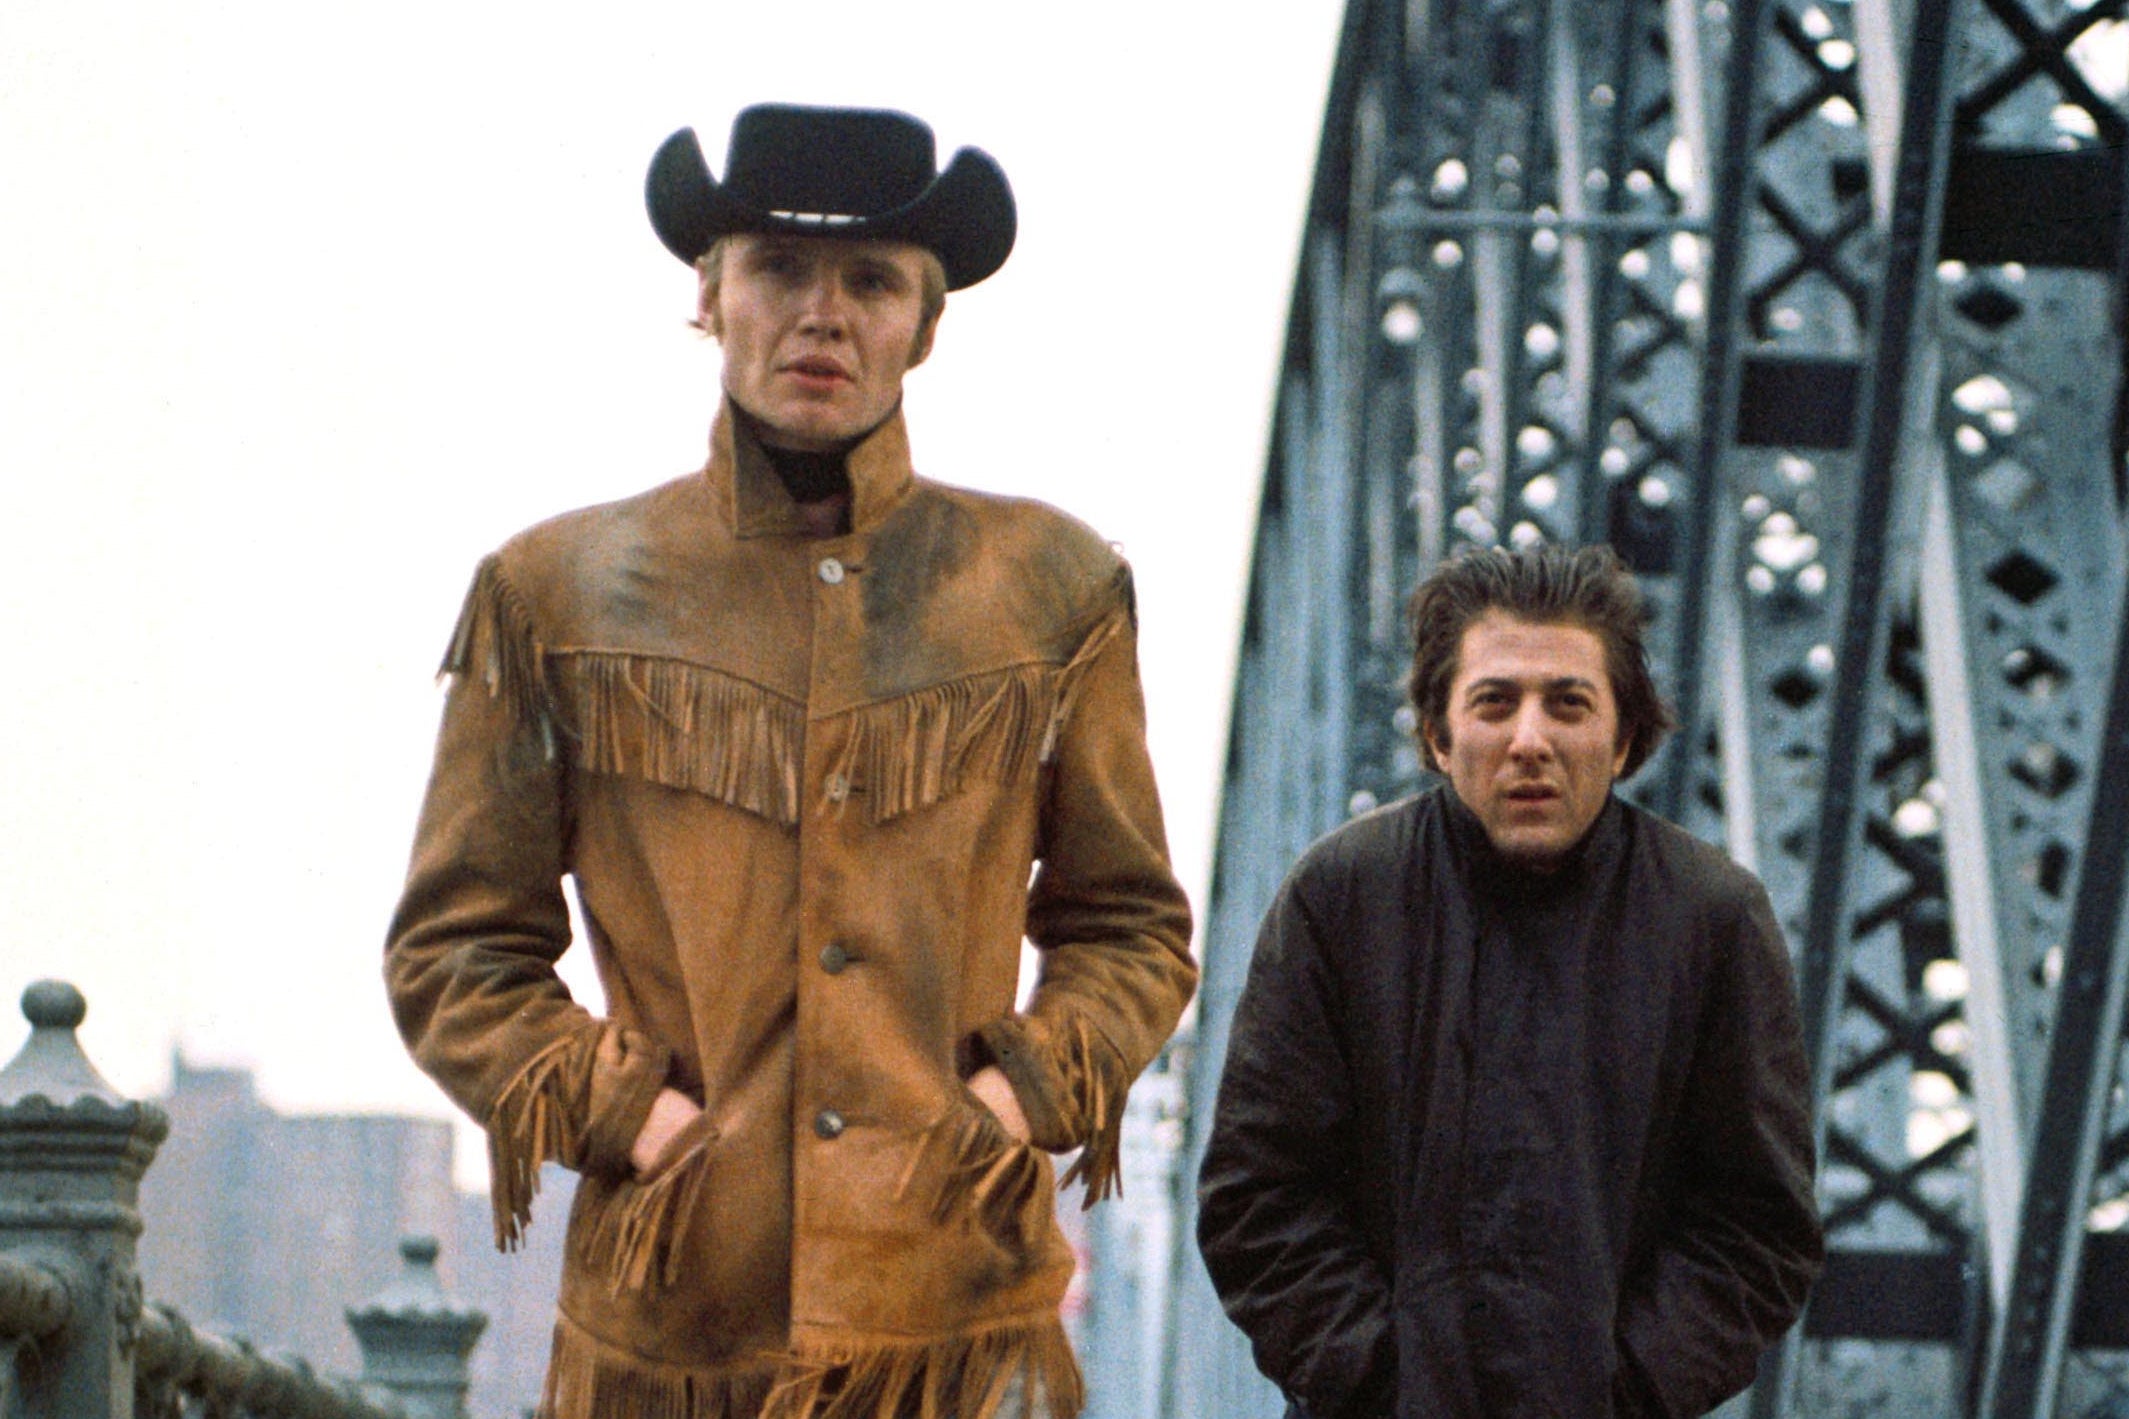 A long time ago: Voight and Dustin Hoffman in the seminal ‘Midnight Cowboy’